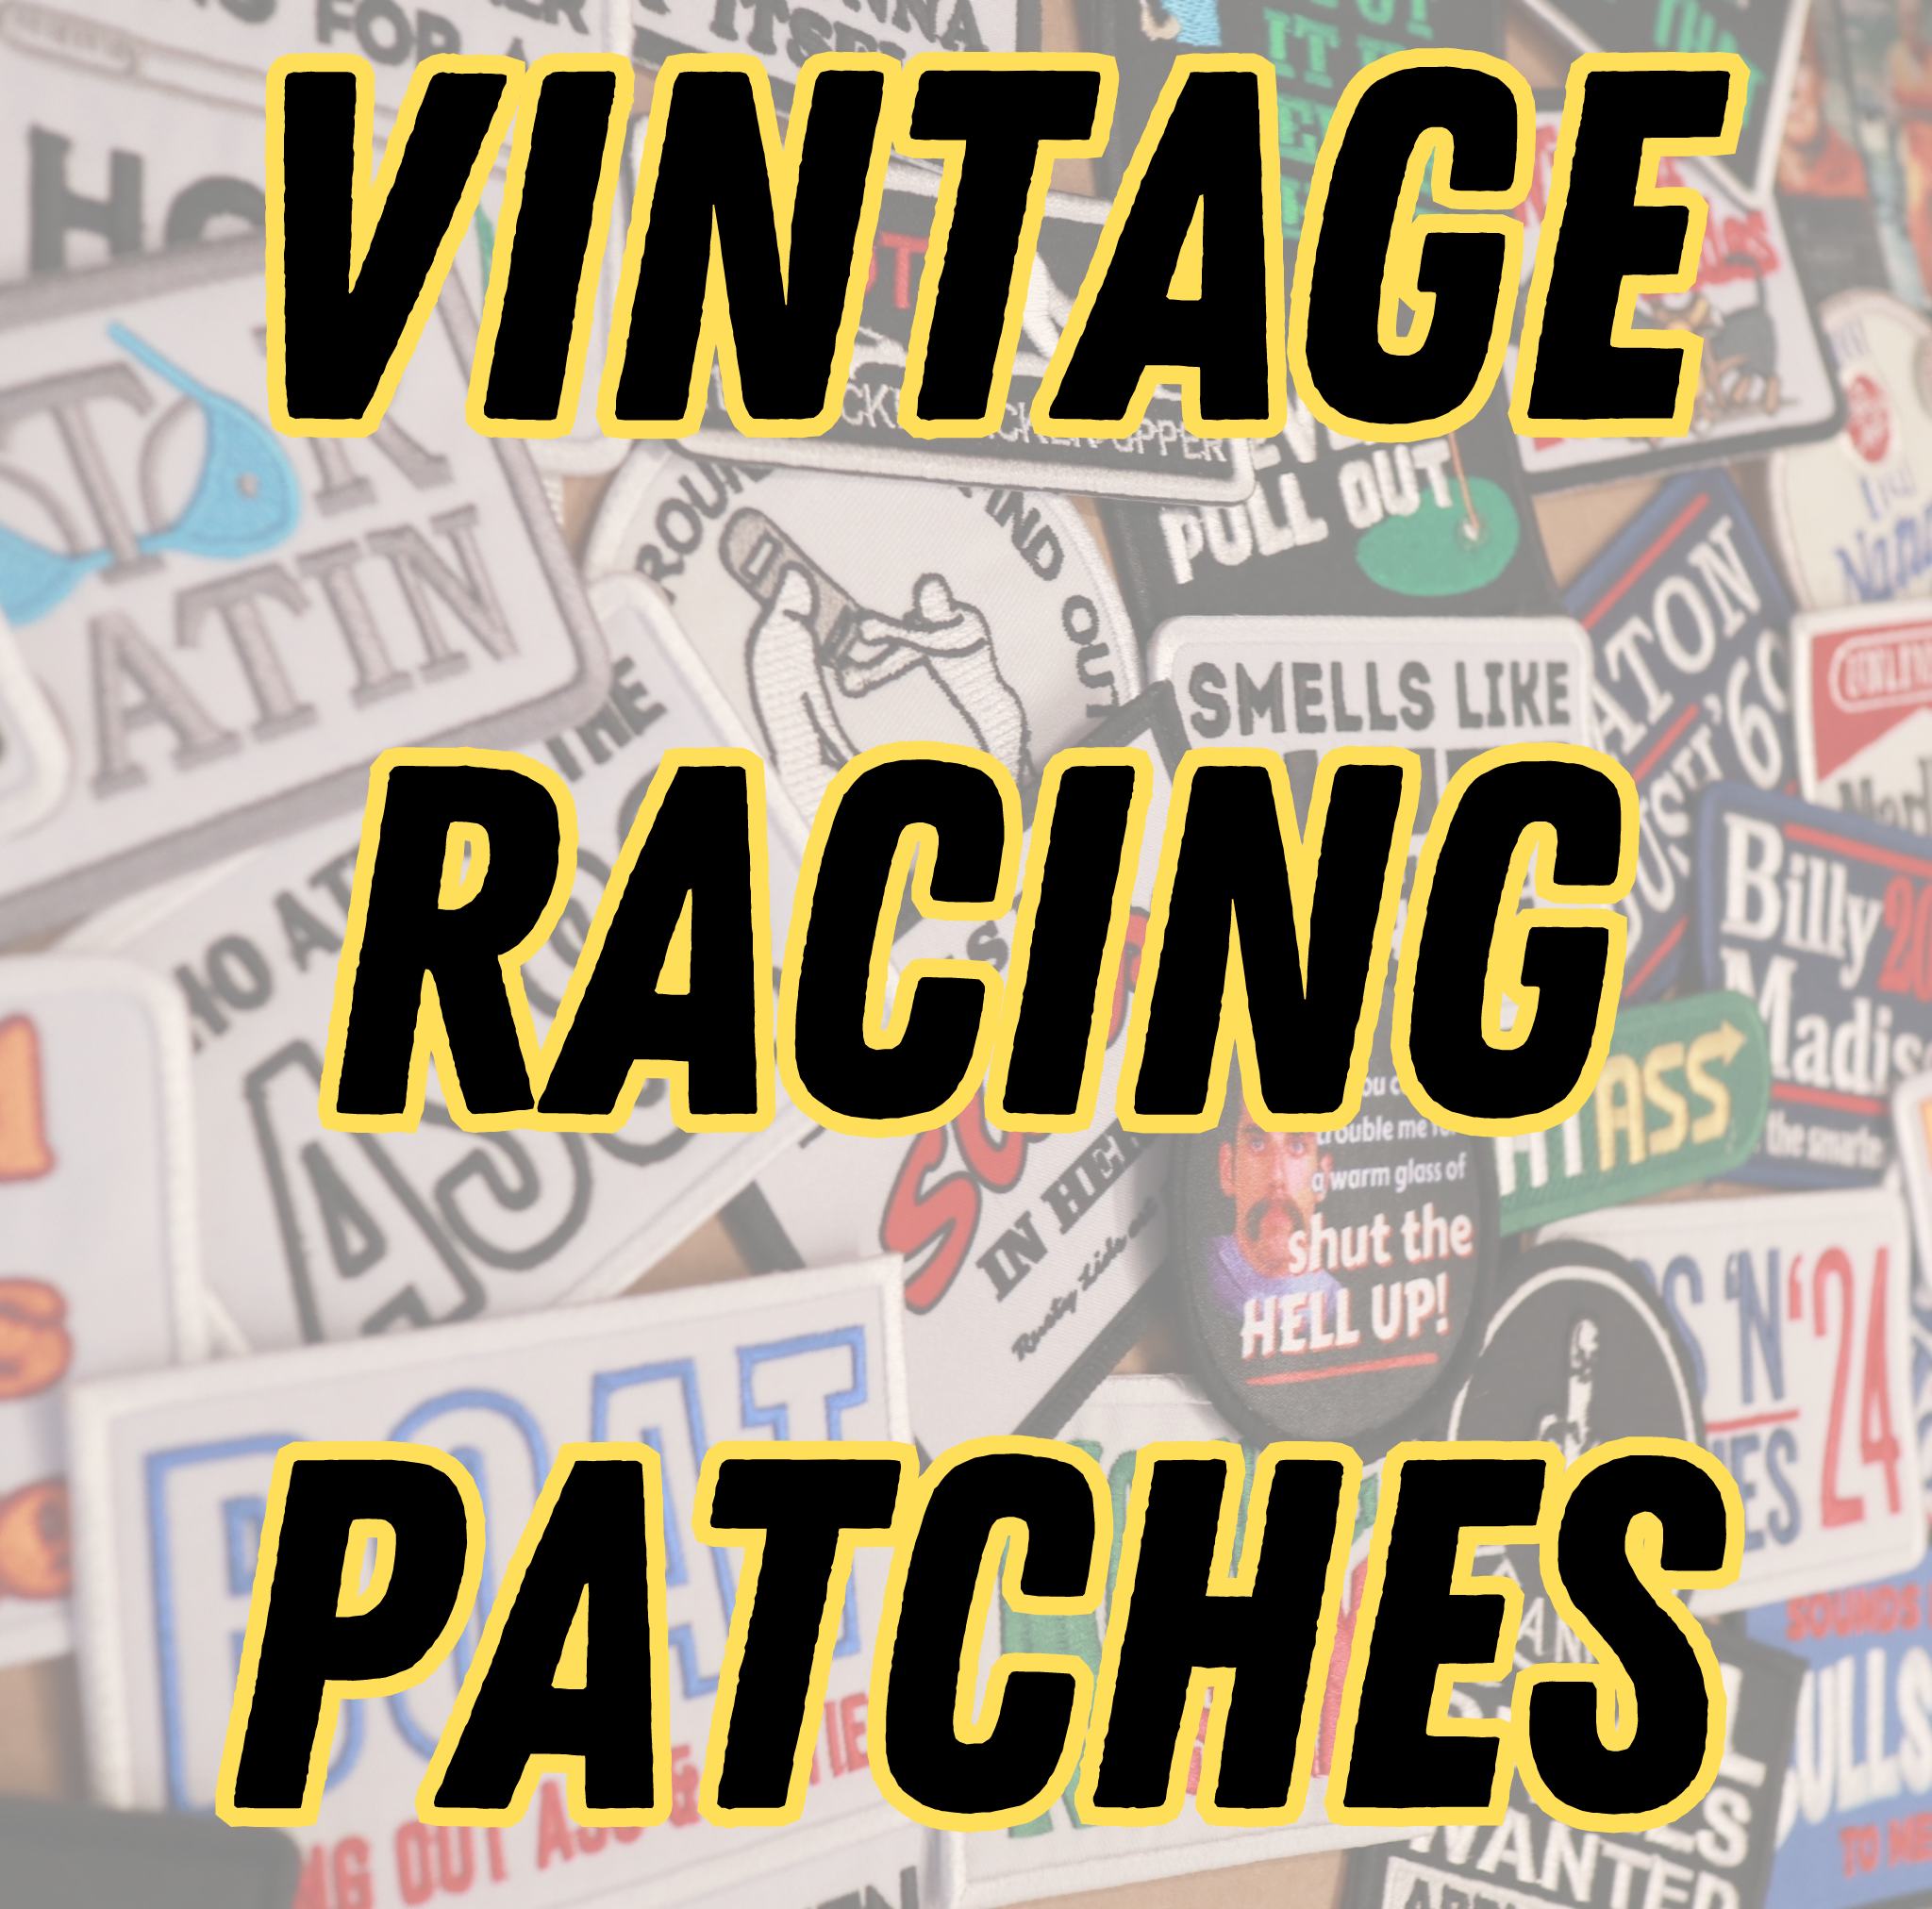 Vintage Racing Patches